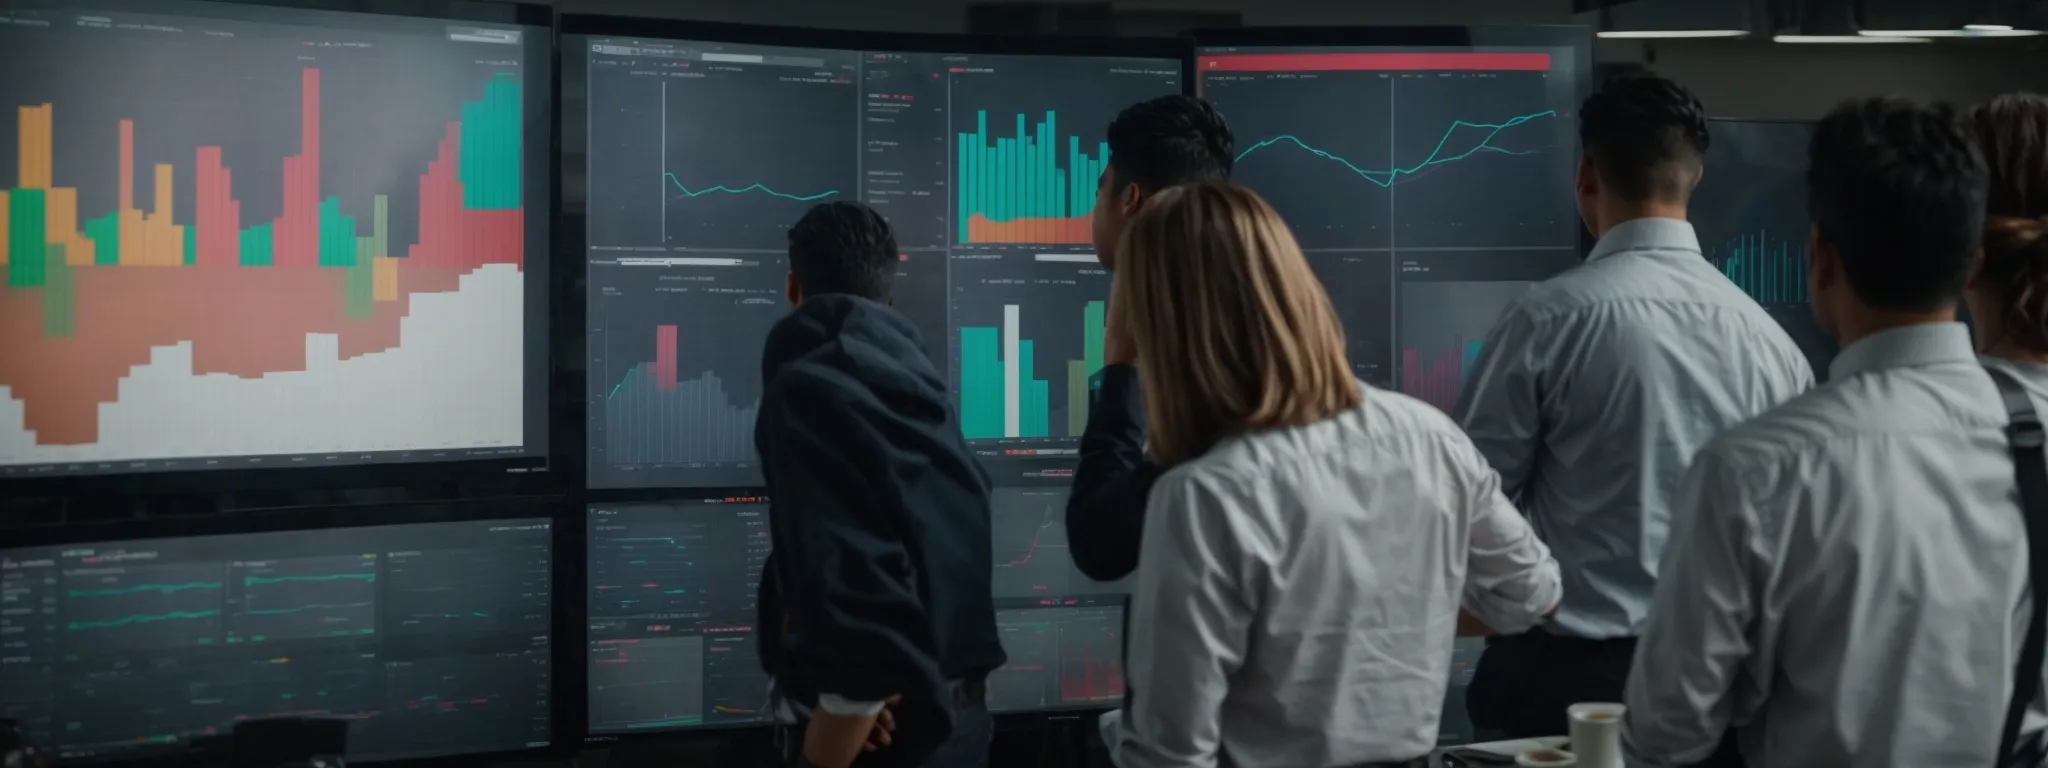 a group of professionals gathered around a large screen displaying colorful graphs and website analytics.